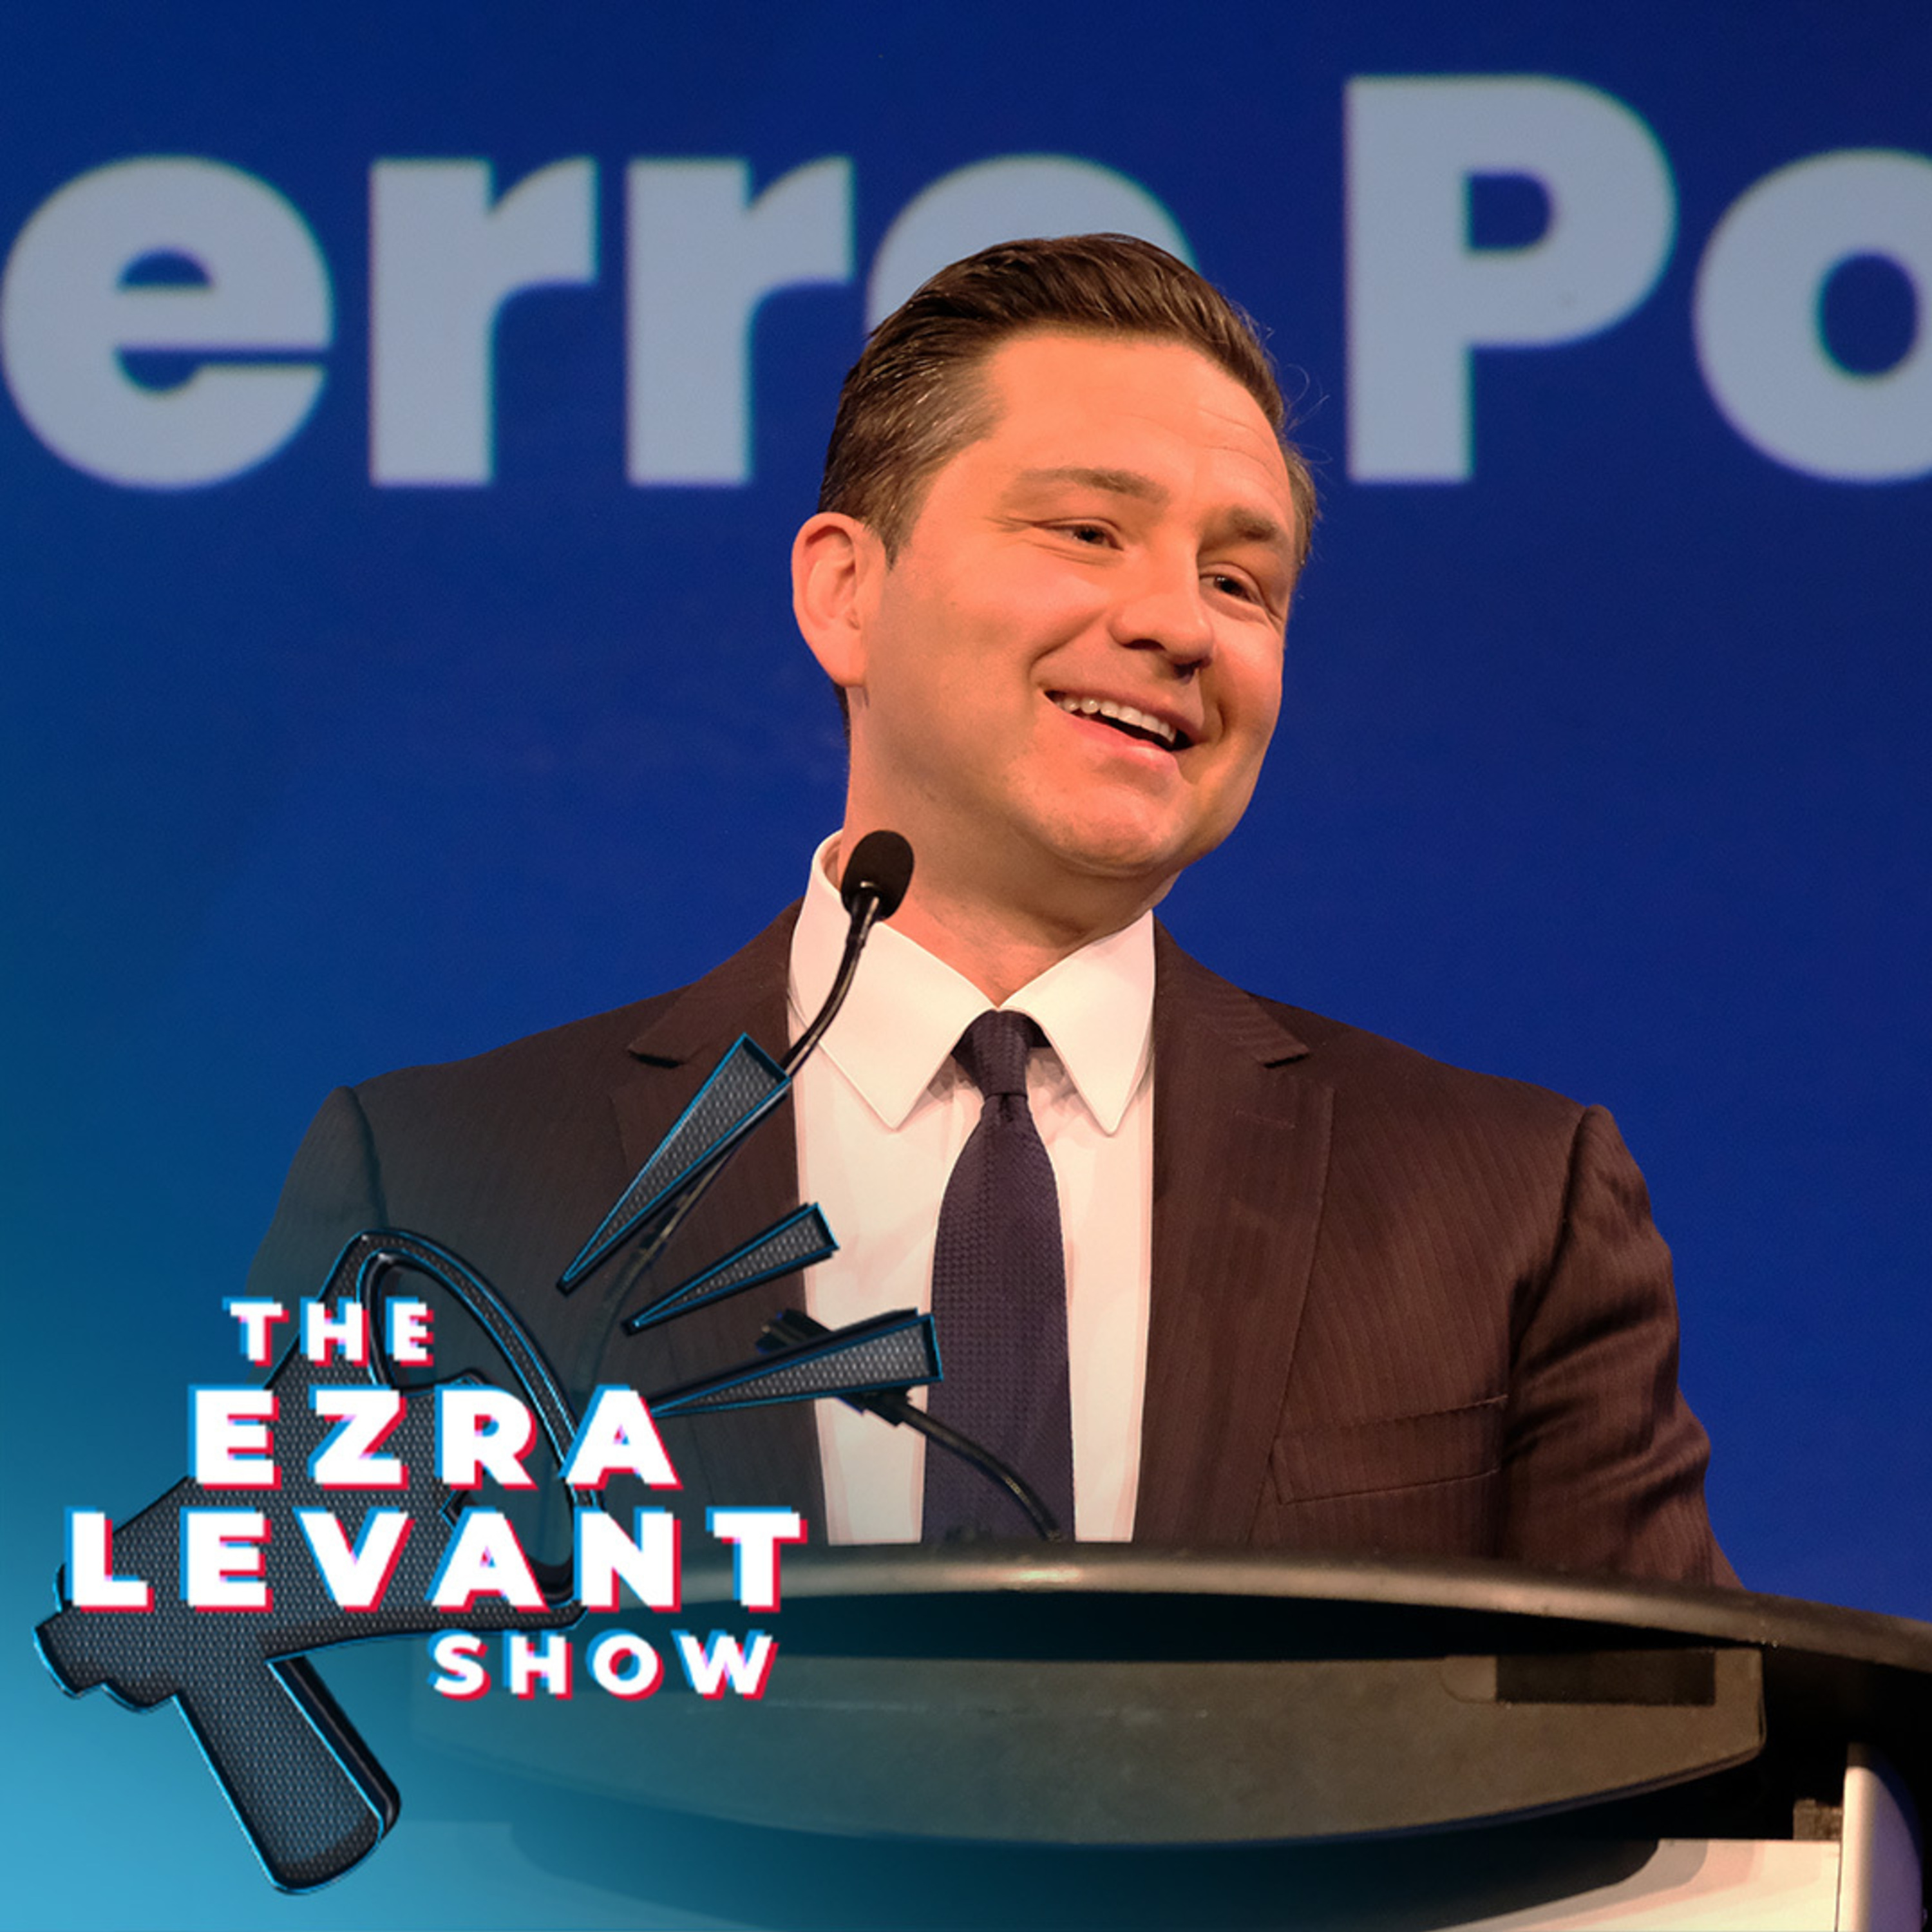 EZRA LEVANT | Pierre Poilievre gives a speech and a global warming kook heckles him